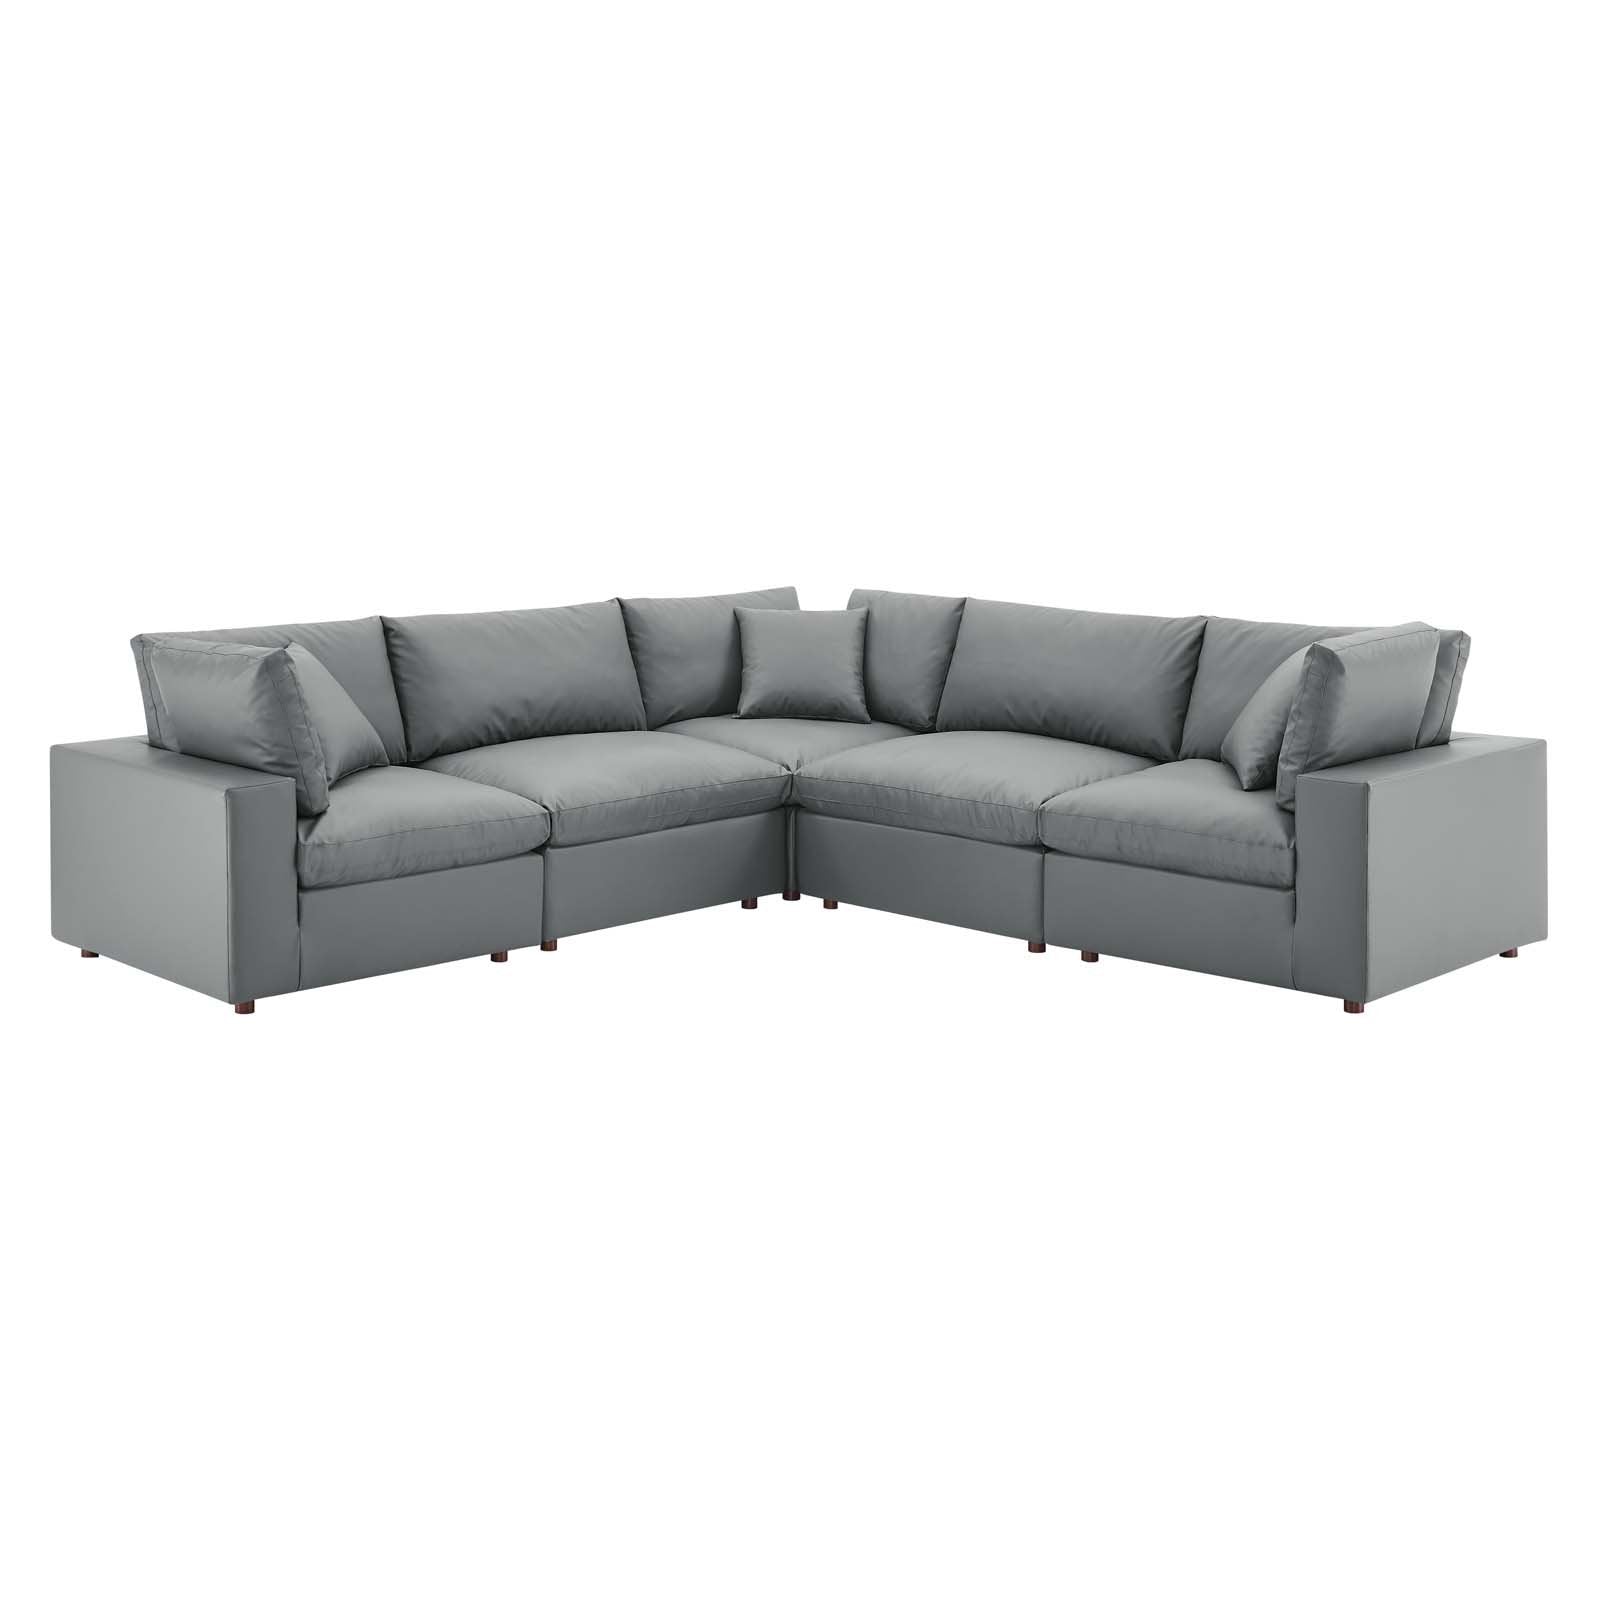 Commix Down Filled Overstuffed Vegan Leather 5-Piece Sectional Sofa